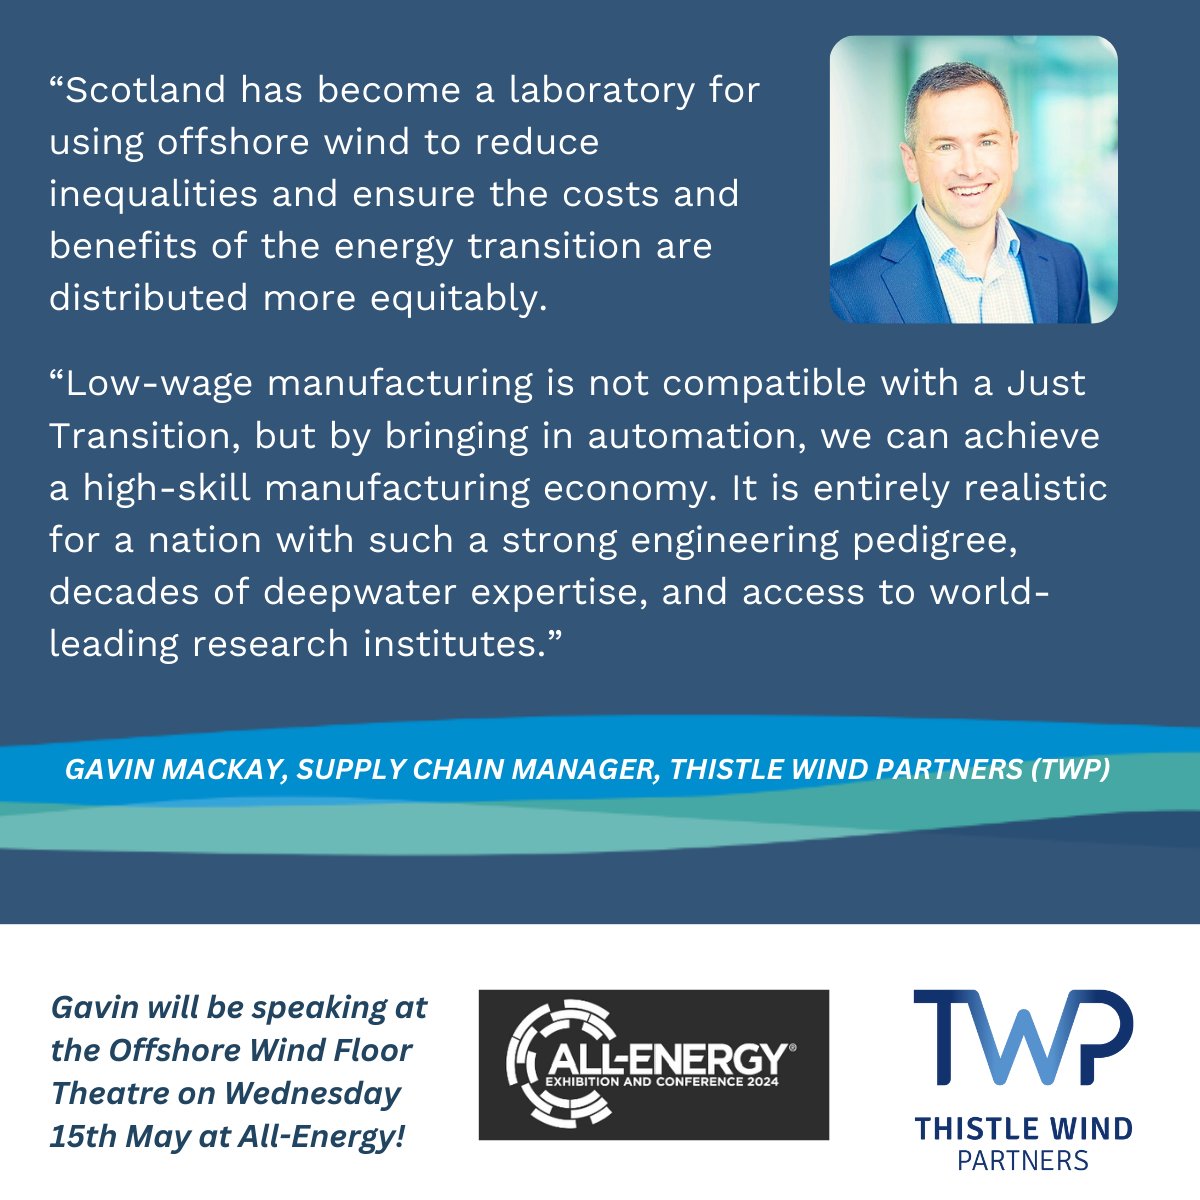 Catch up with TWP and get involved in our discussion about the manufacturing opportunity for Scotland from #offshorewind at @AllEnergy next month! @scotent @CaithnessCoC @ScotRenew @chambertalk